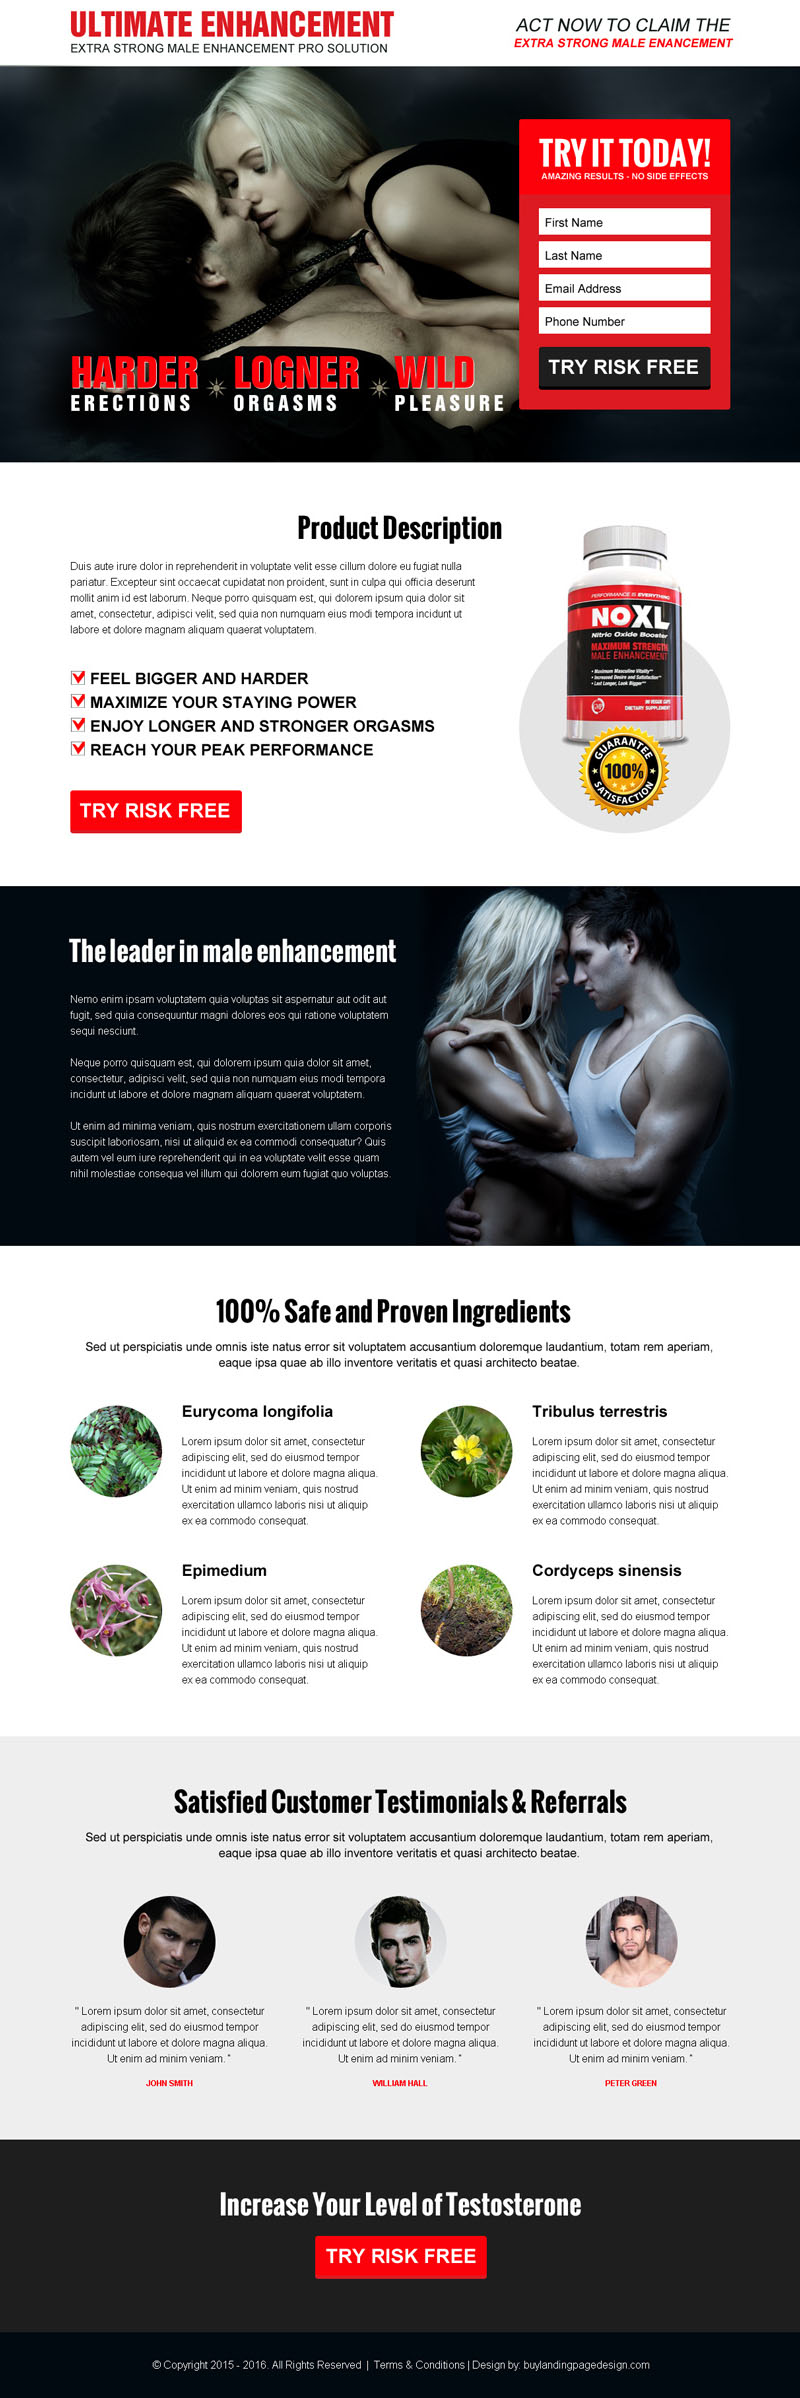 extra-strong-male-enhancement-lead-capture-landing-page-design-template-018